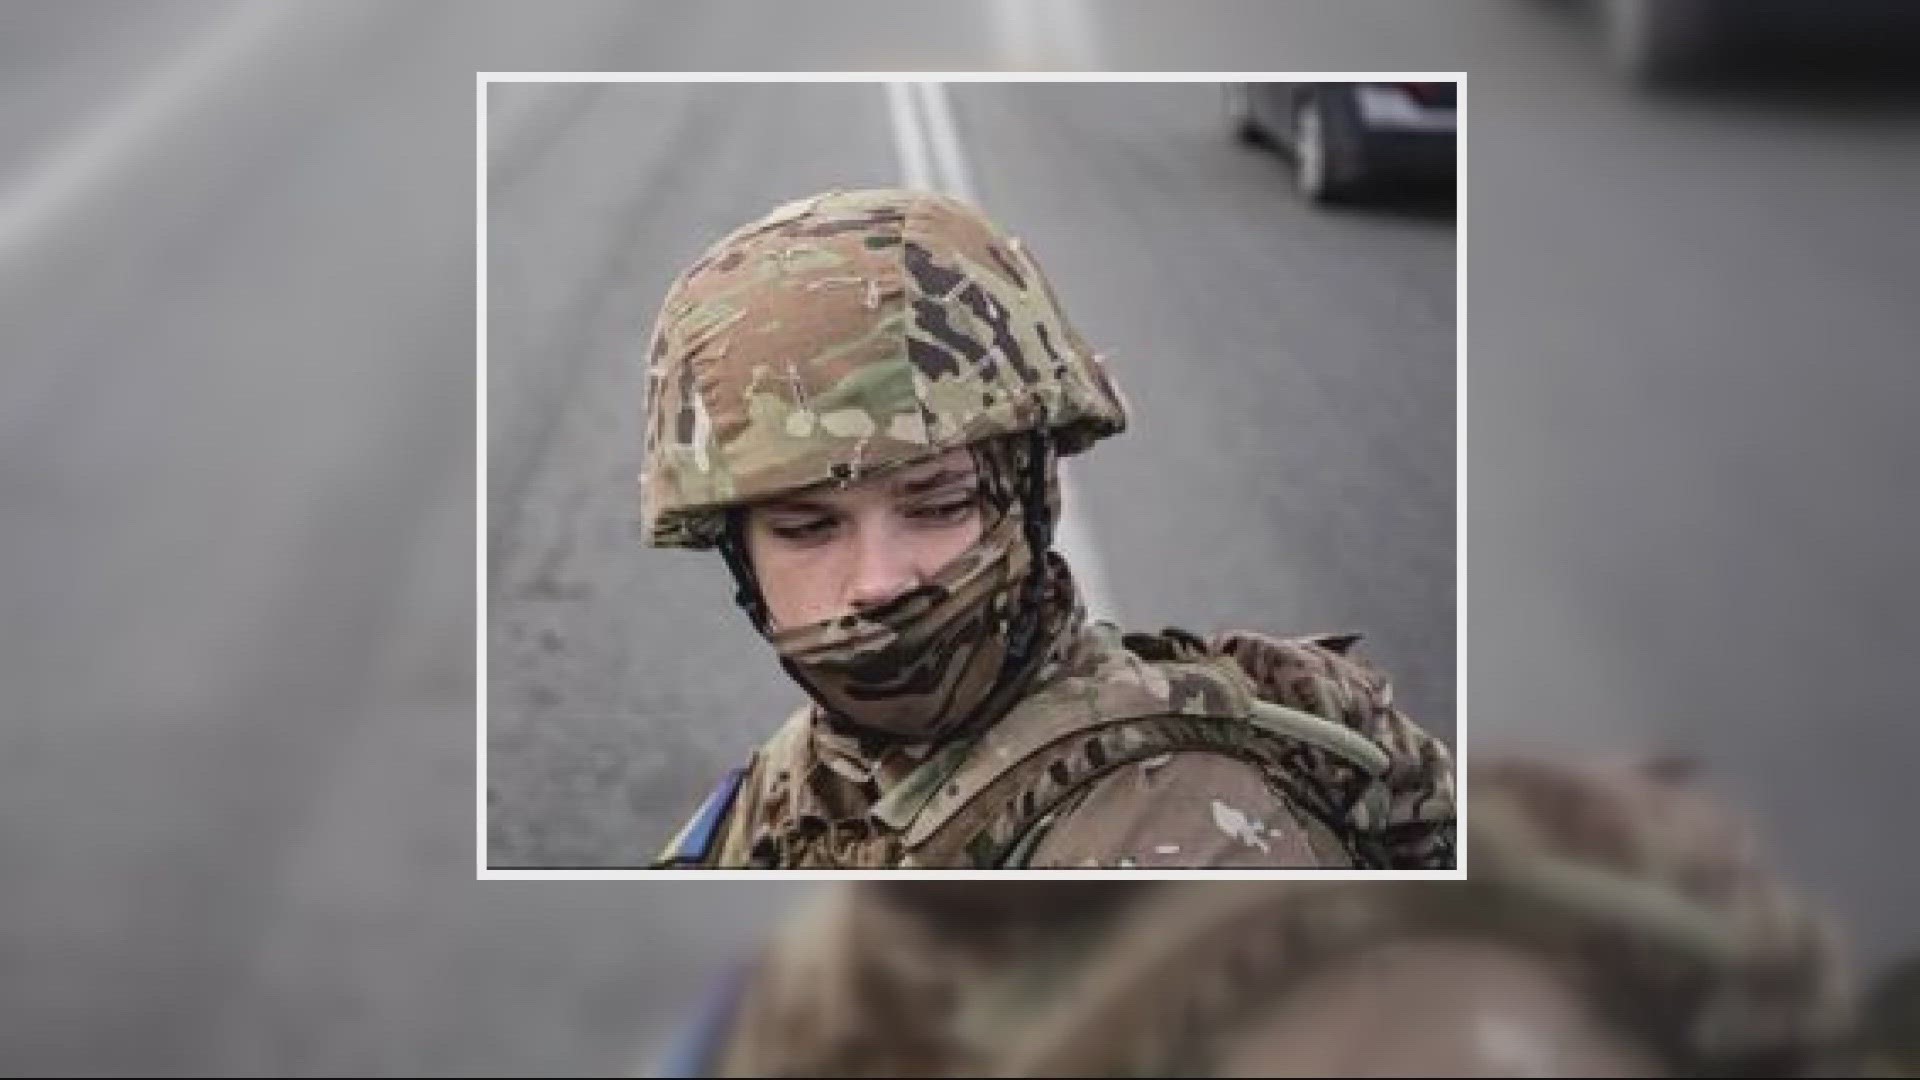 Motivated by his Ukrainian heritage, Edward Wilton III enlisted to battle until last month when Russian forces killed him.